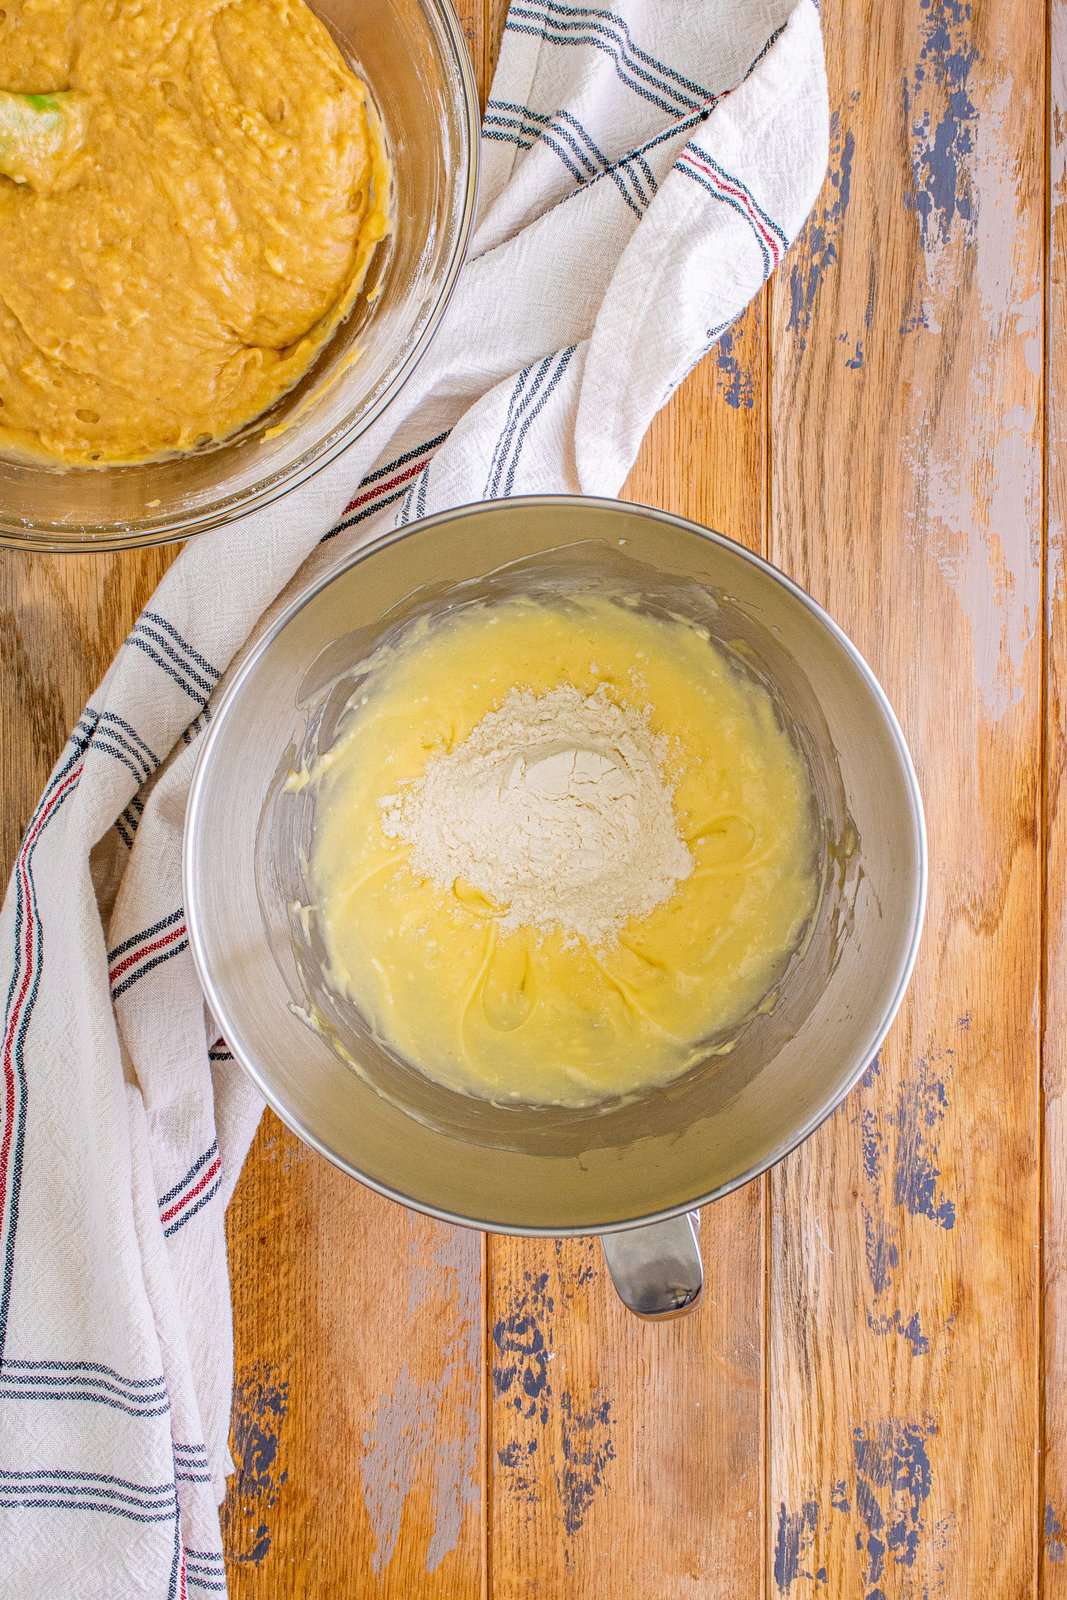 flour added to cheesecake batter in mixing bowl